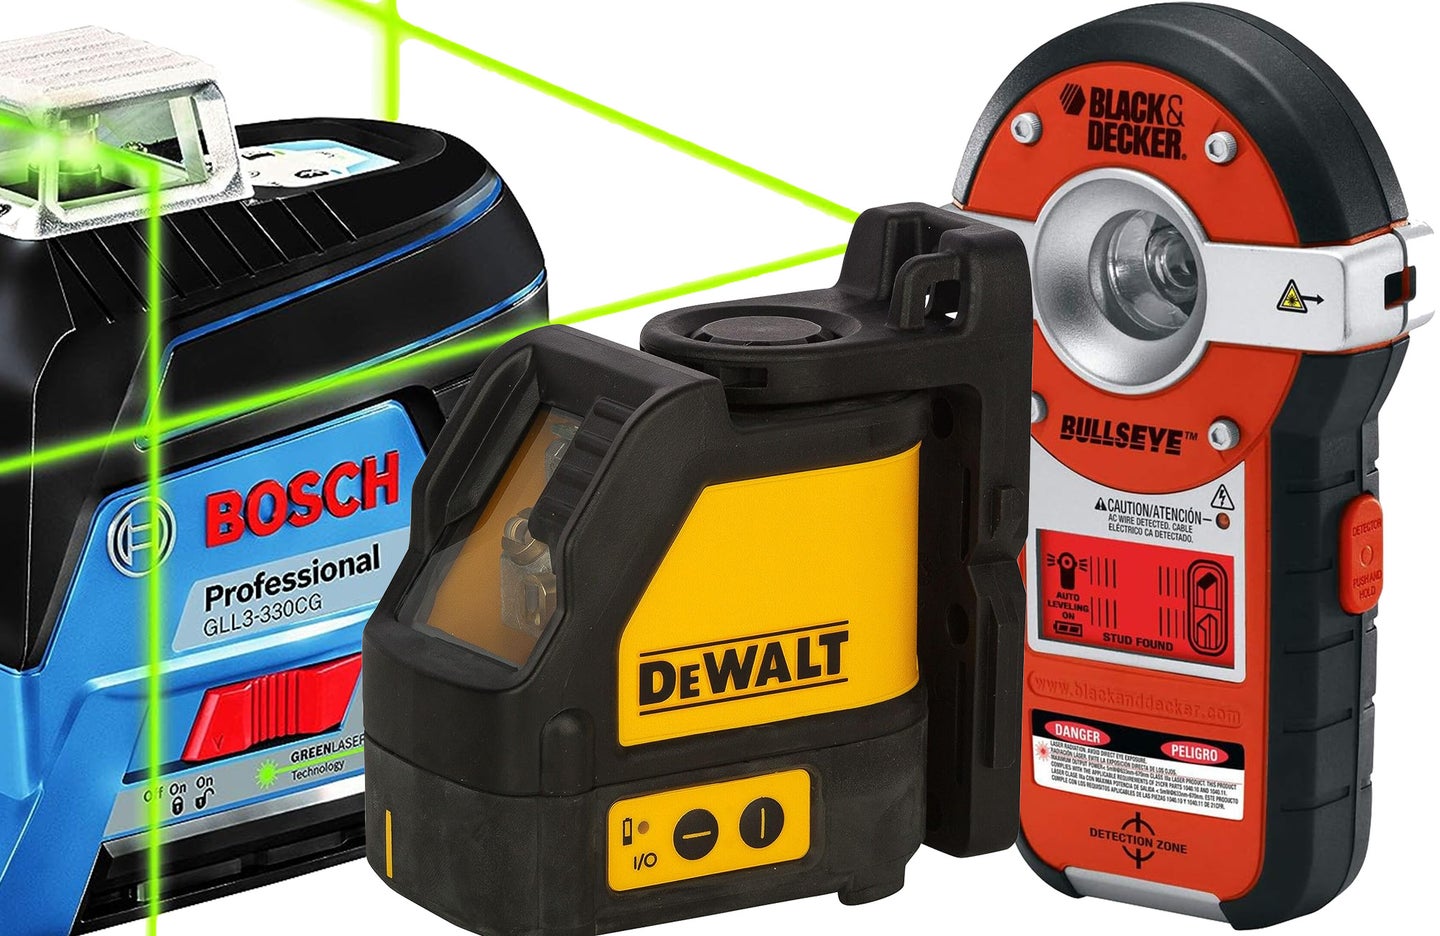 The best laser levels will help you complete home improvement projects with precision.